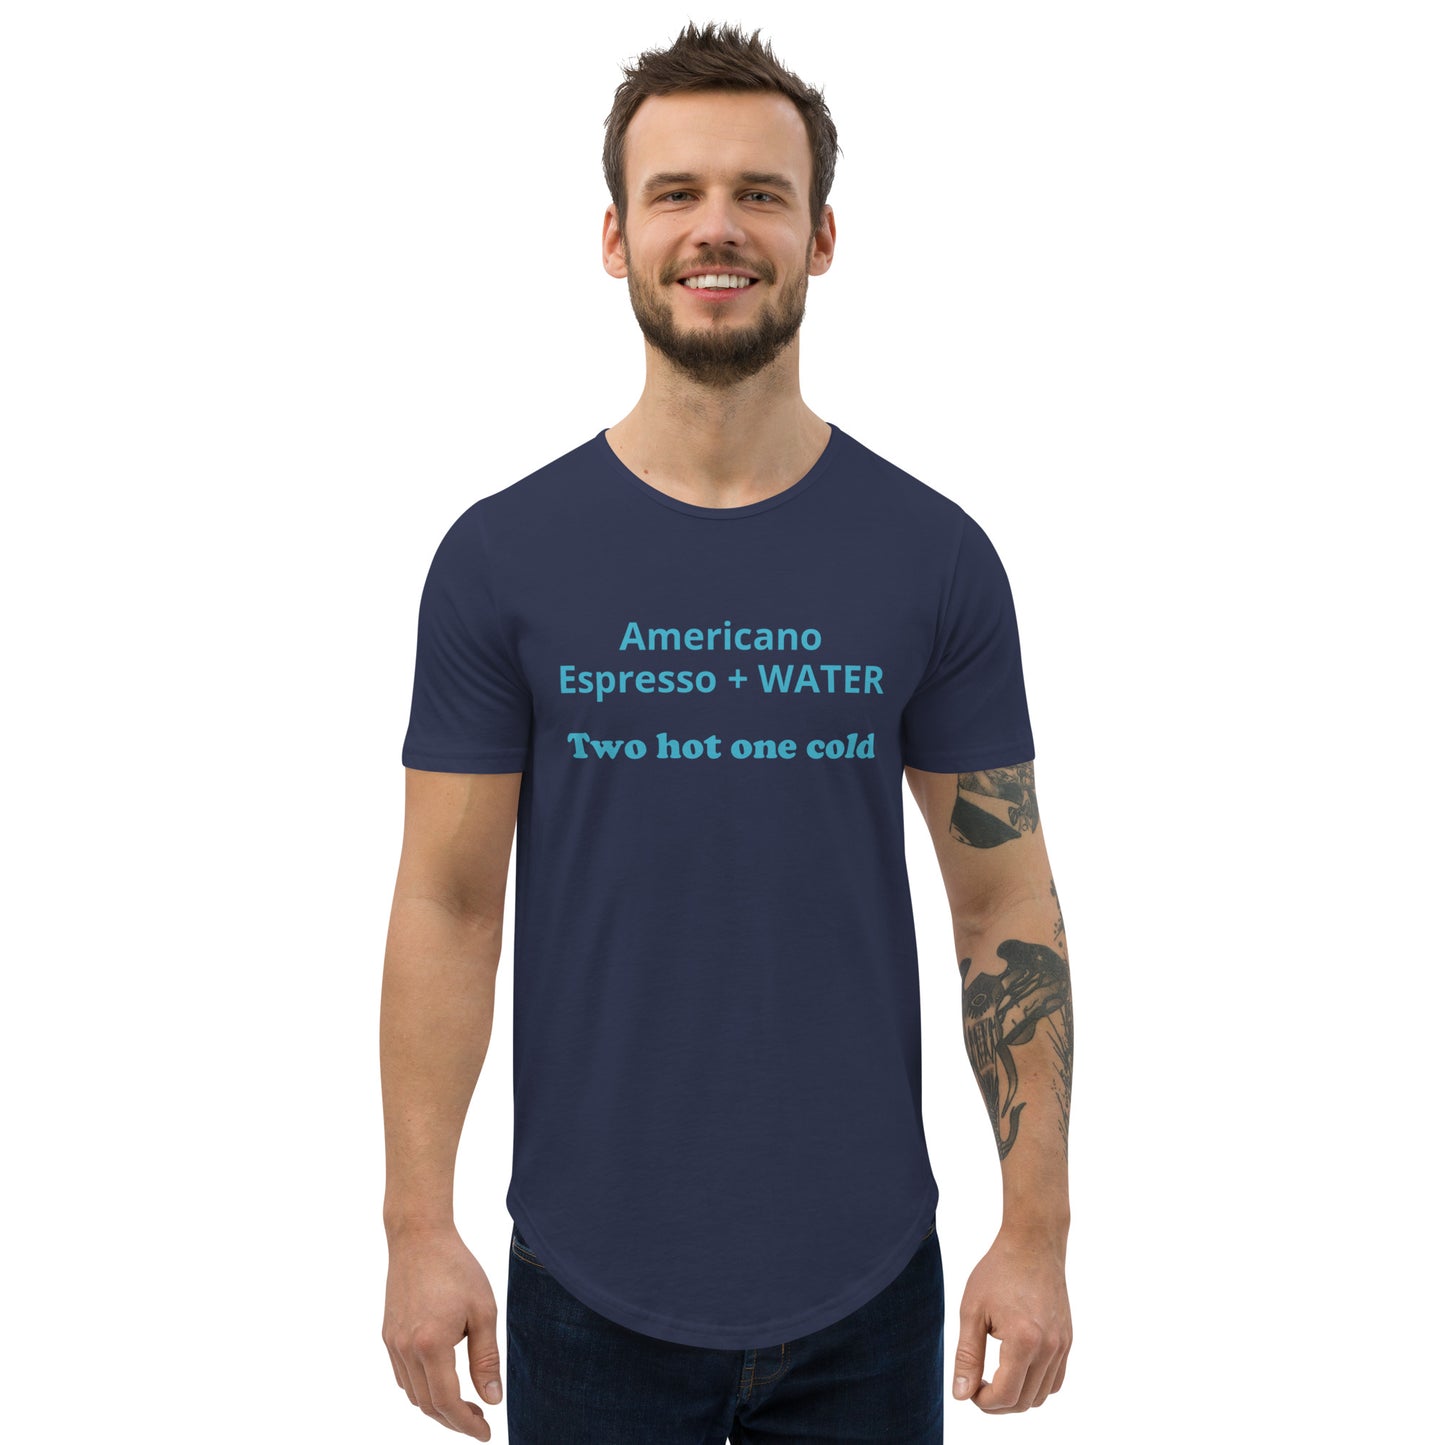 Shirt inspired by out constant reminder on drink making